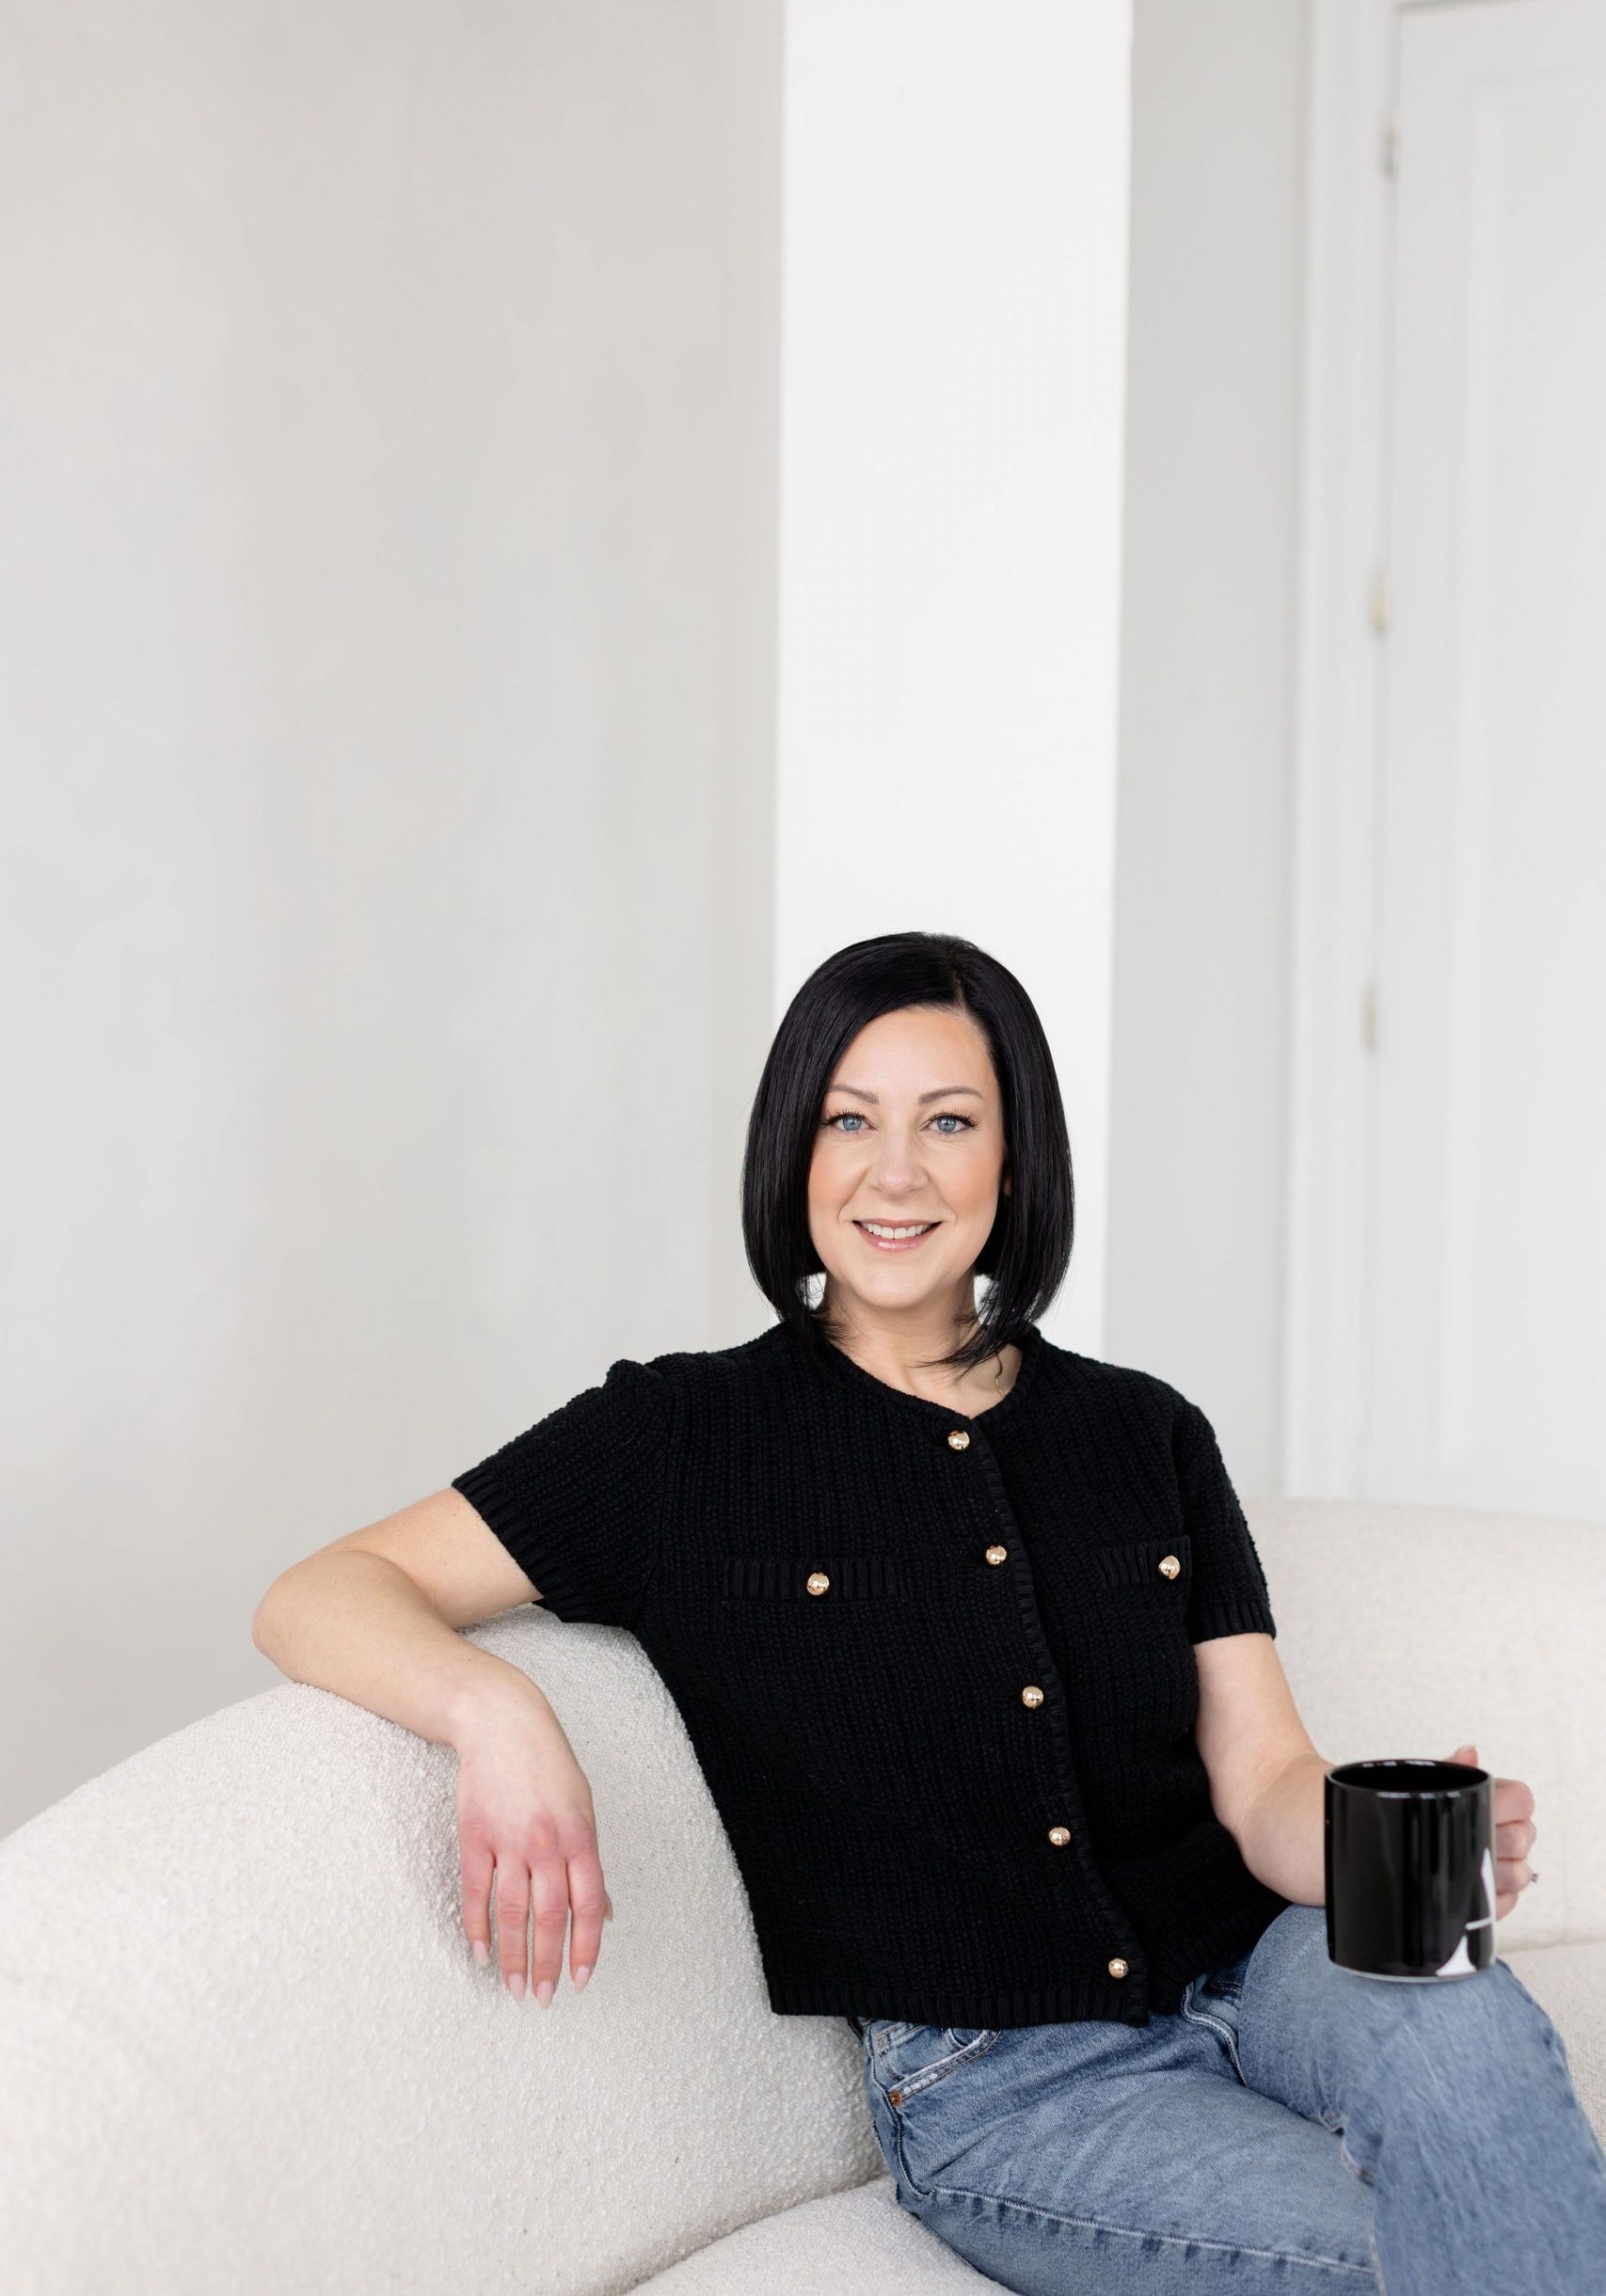 Ashlee McLean - Broker, our team with Community Professionals Brokerage, Coldwell Banker in Hamilton, Ontario.